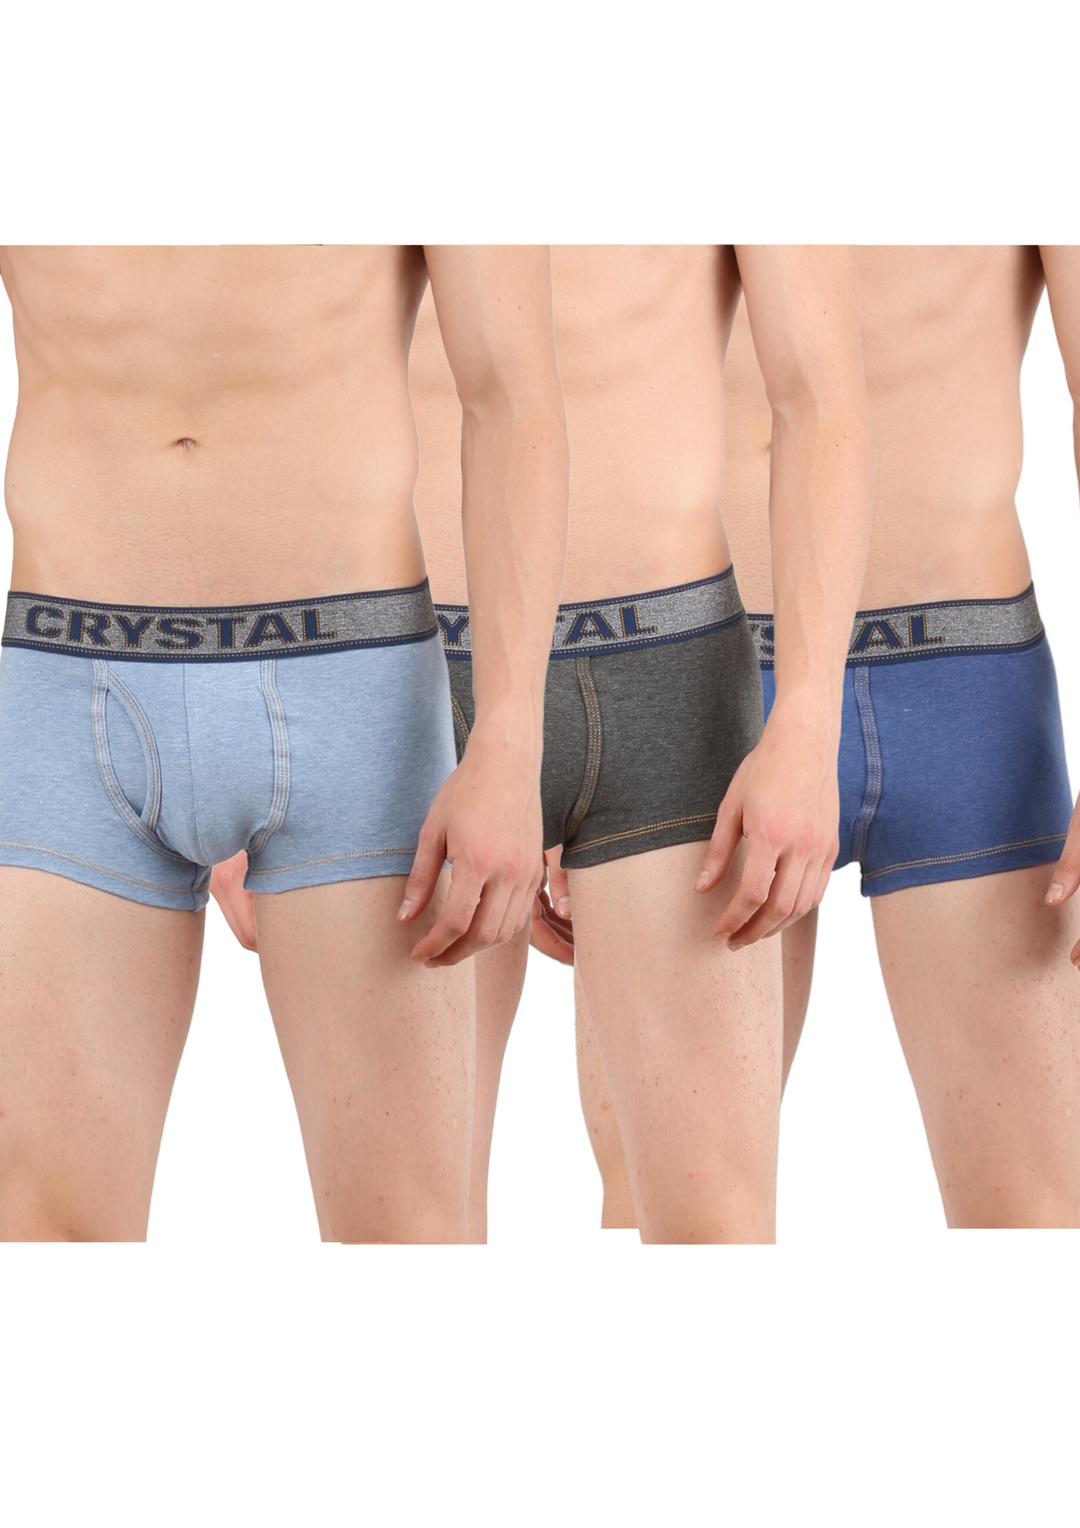 RC 206  Denim Trunk  - Assorted (Pack of 3)